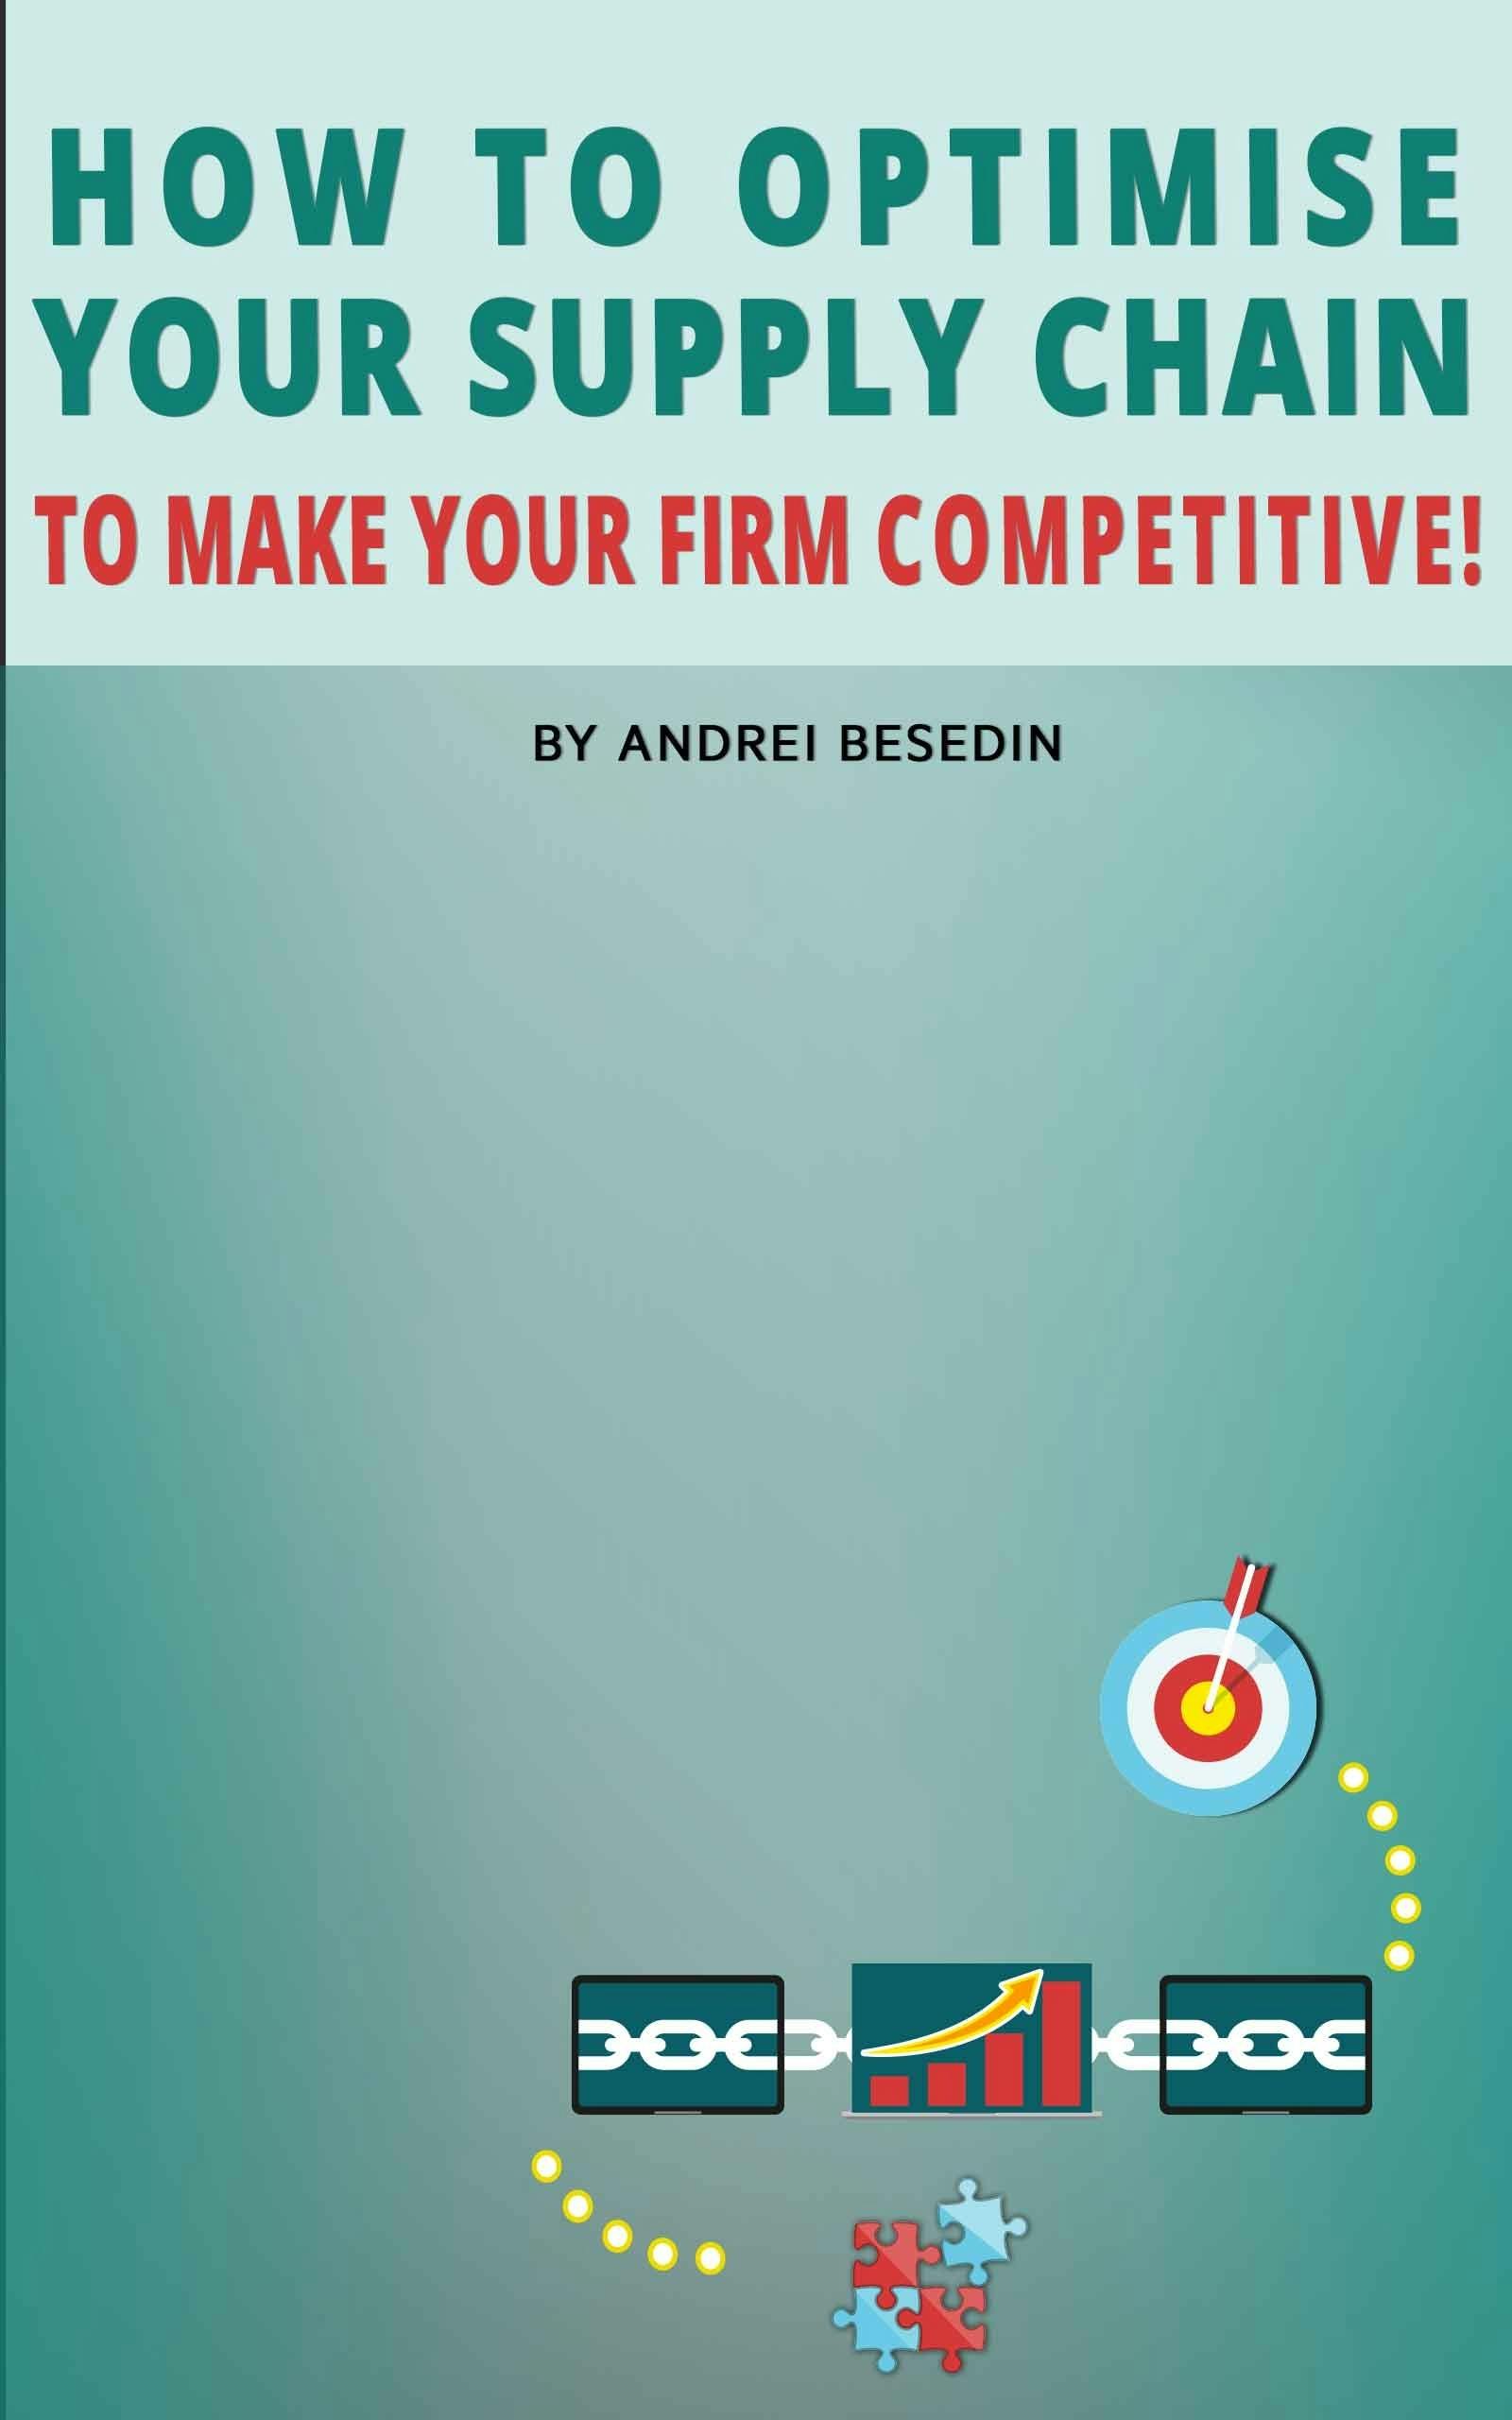 How to Optimise Your Supply Chain to Make Your Firm Competitive! - Andrei Besedin